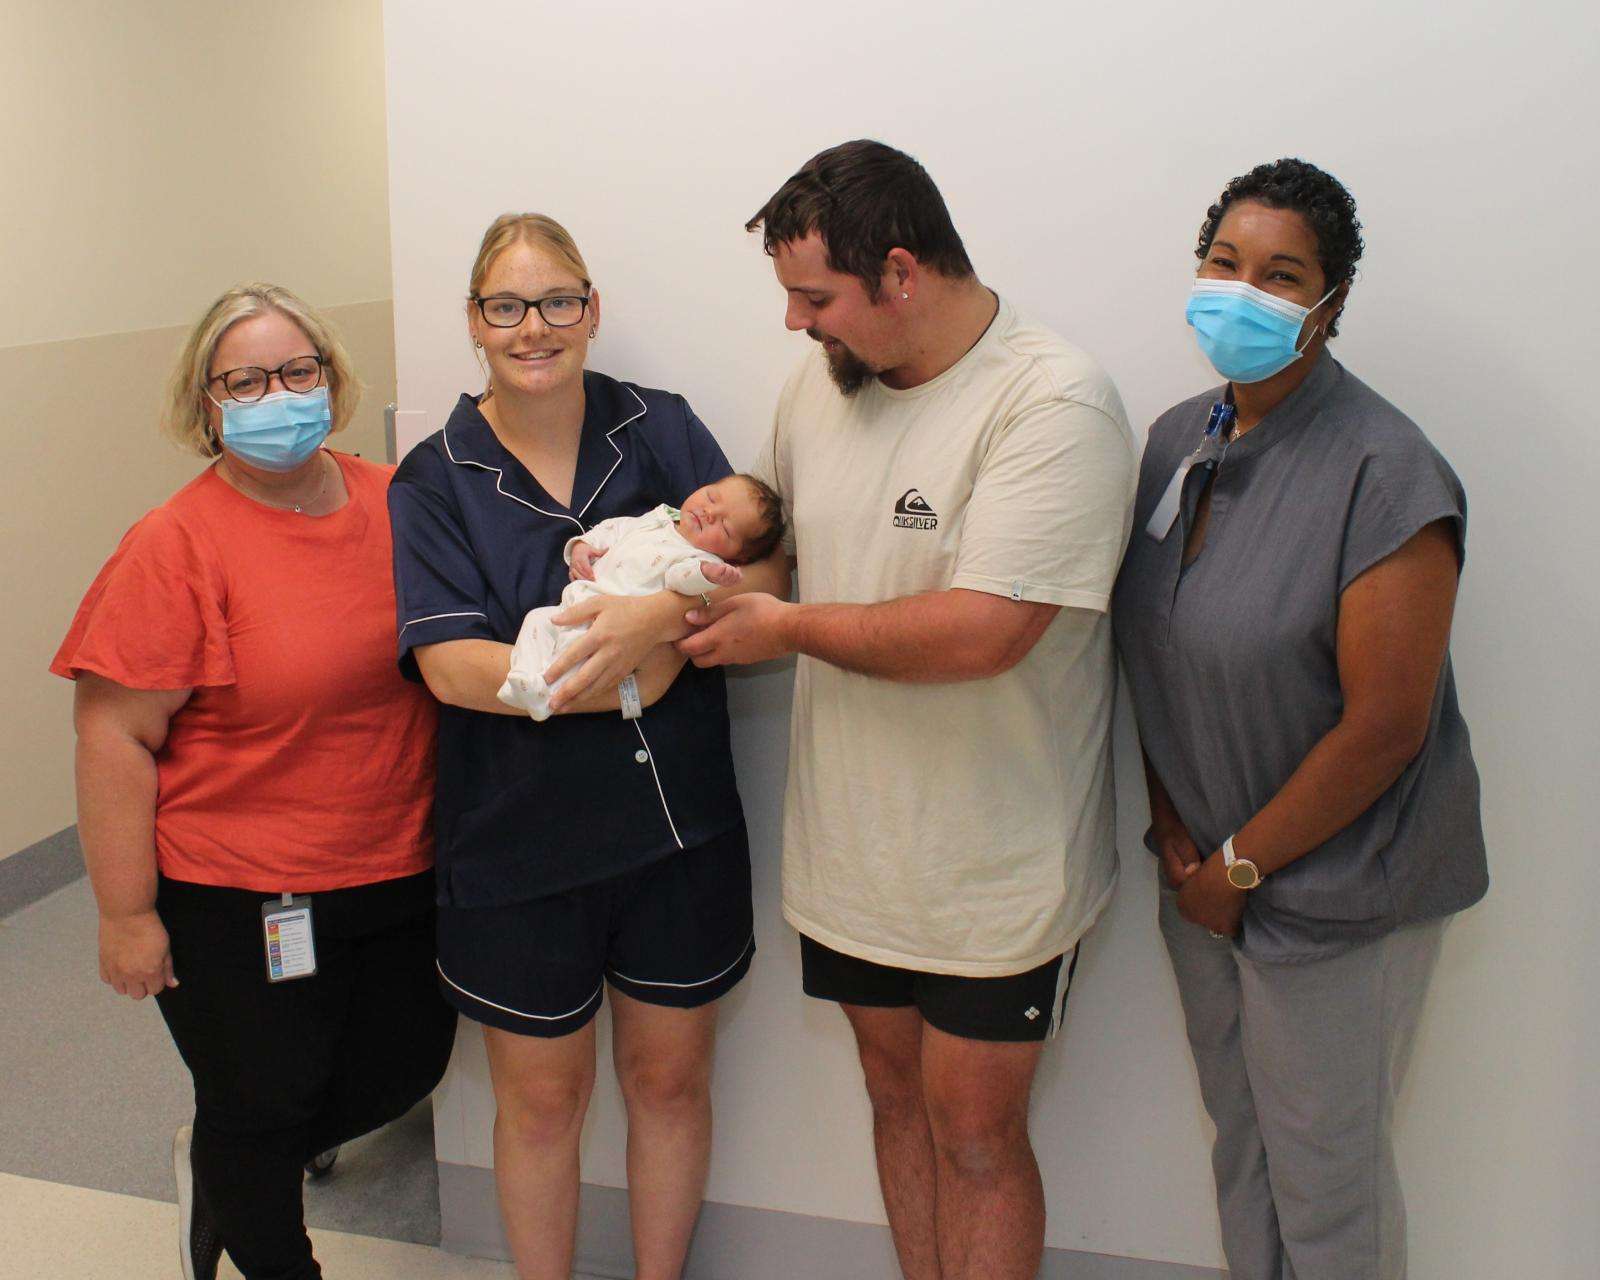 Our Midwifery Unit Manager Relle McMillin with new mum Savanah Marmion, baby Leia Raynes, new father Liam Raynes and our Clinical Director of Women's Services, Carmen Brown.